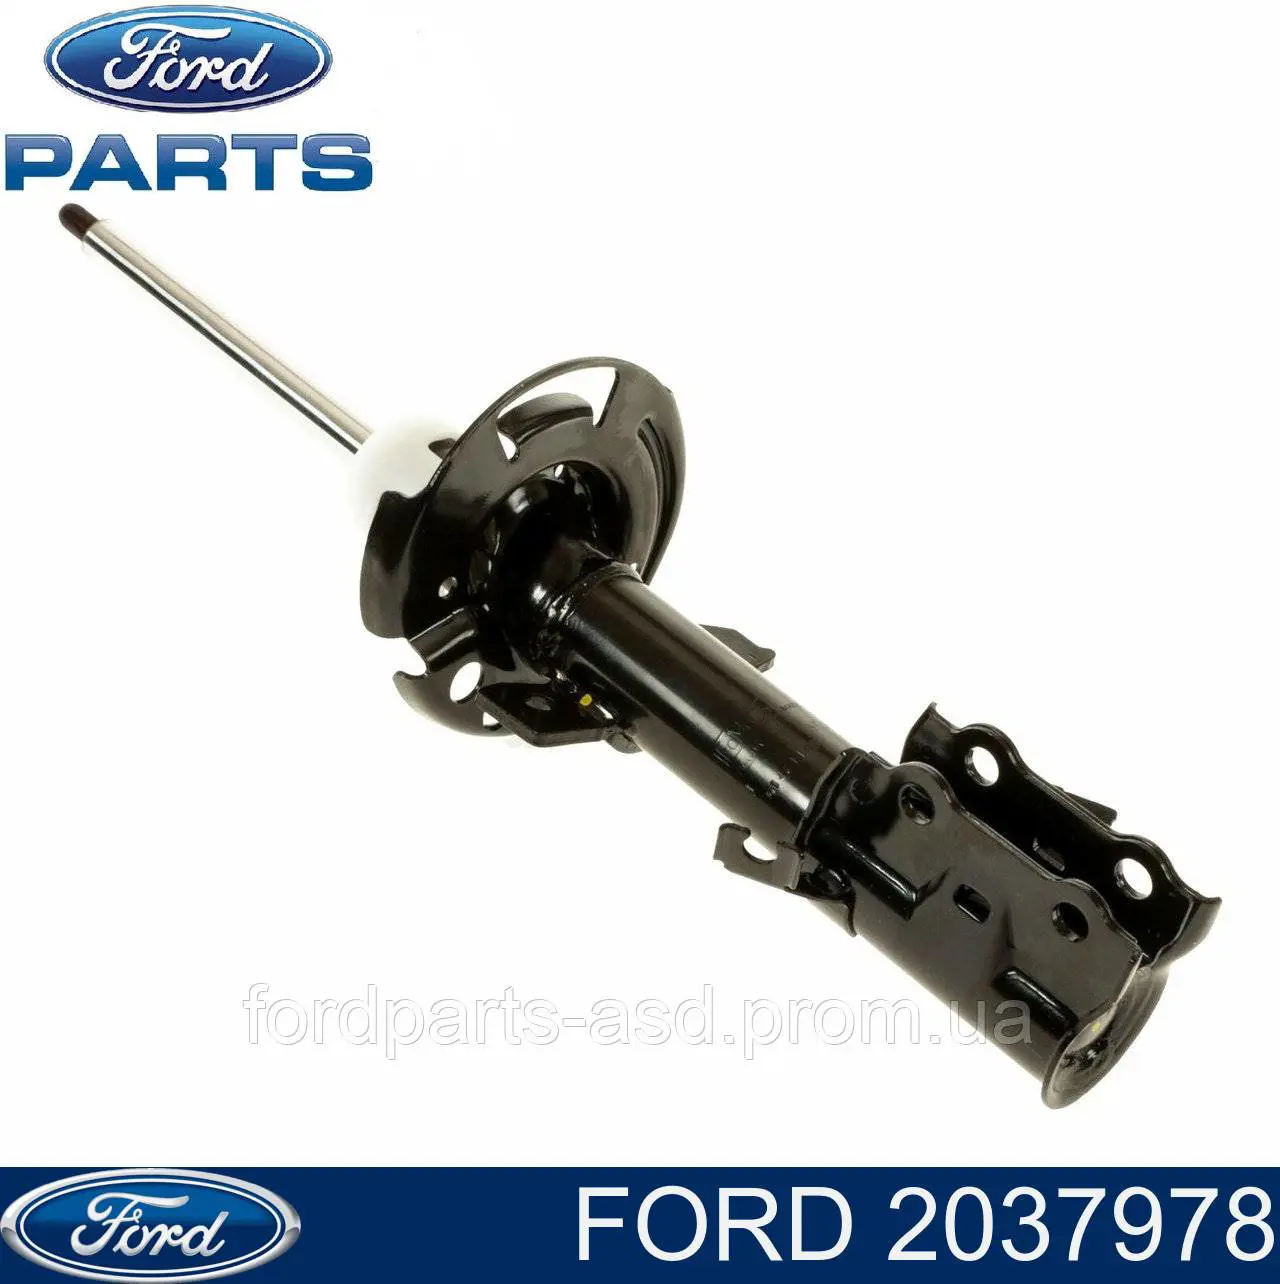 2037978 Ford 